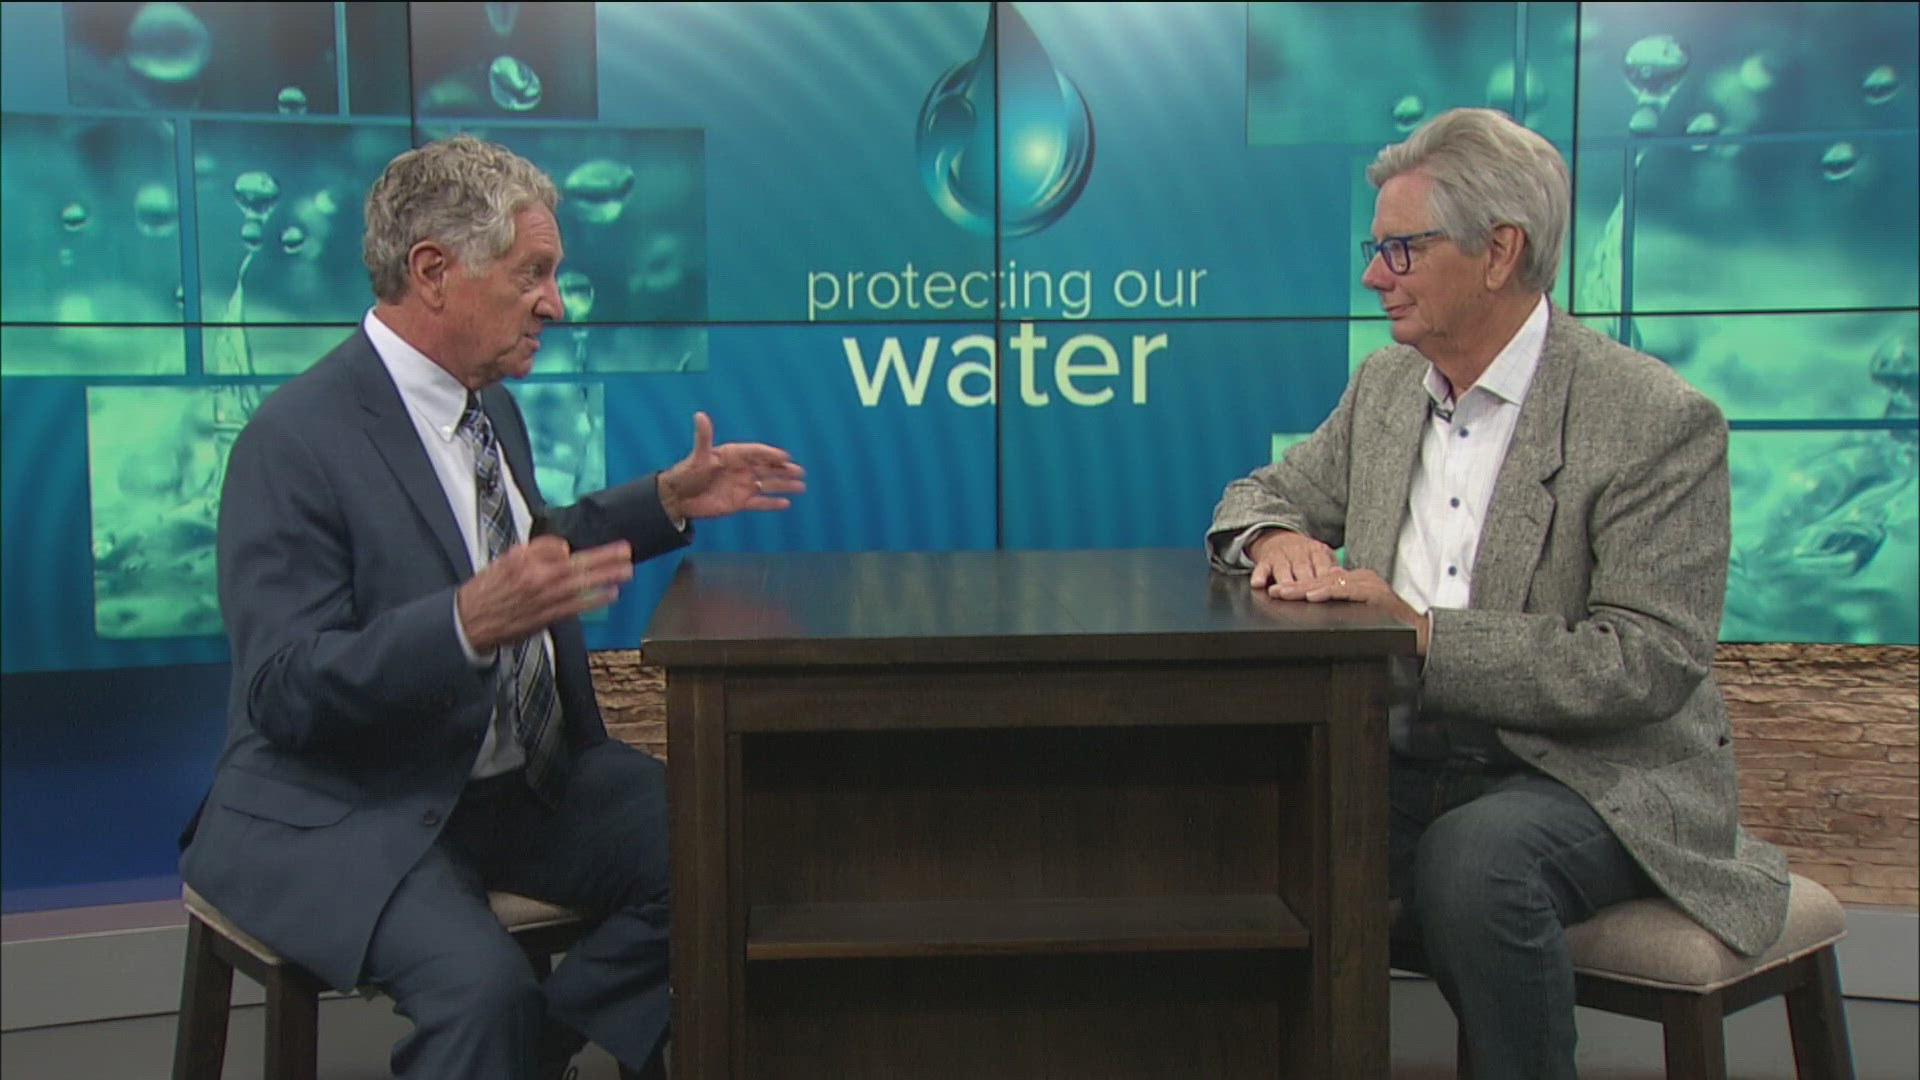 Lucas County Commissioner Pete Gerken talks with Dan Cummins about the 2014 water crisis and steps the county has taken to keep our water safe.